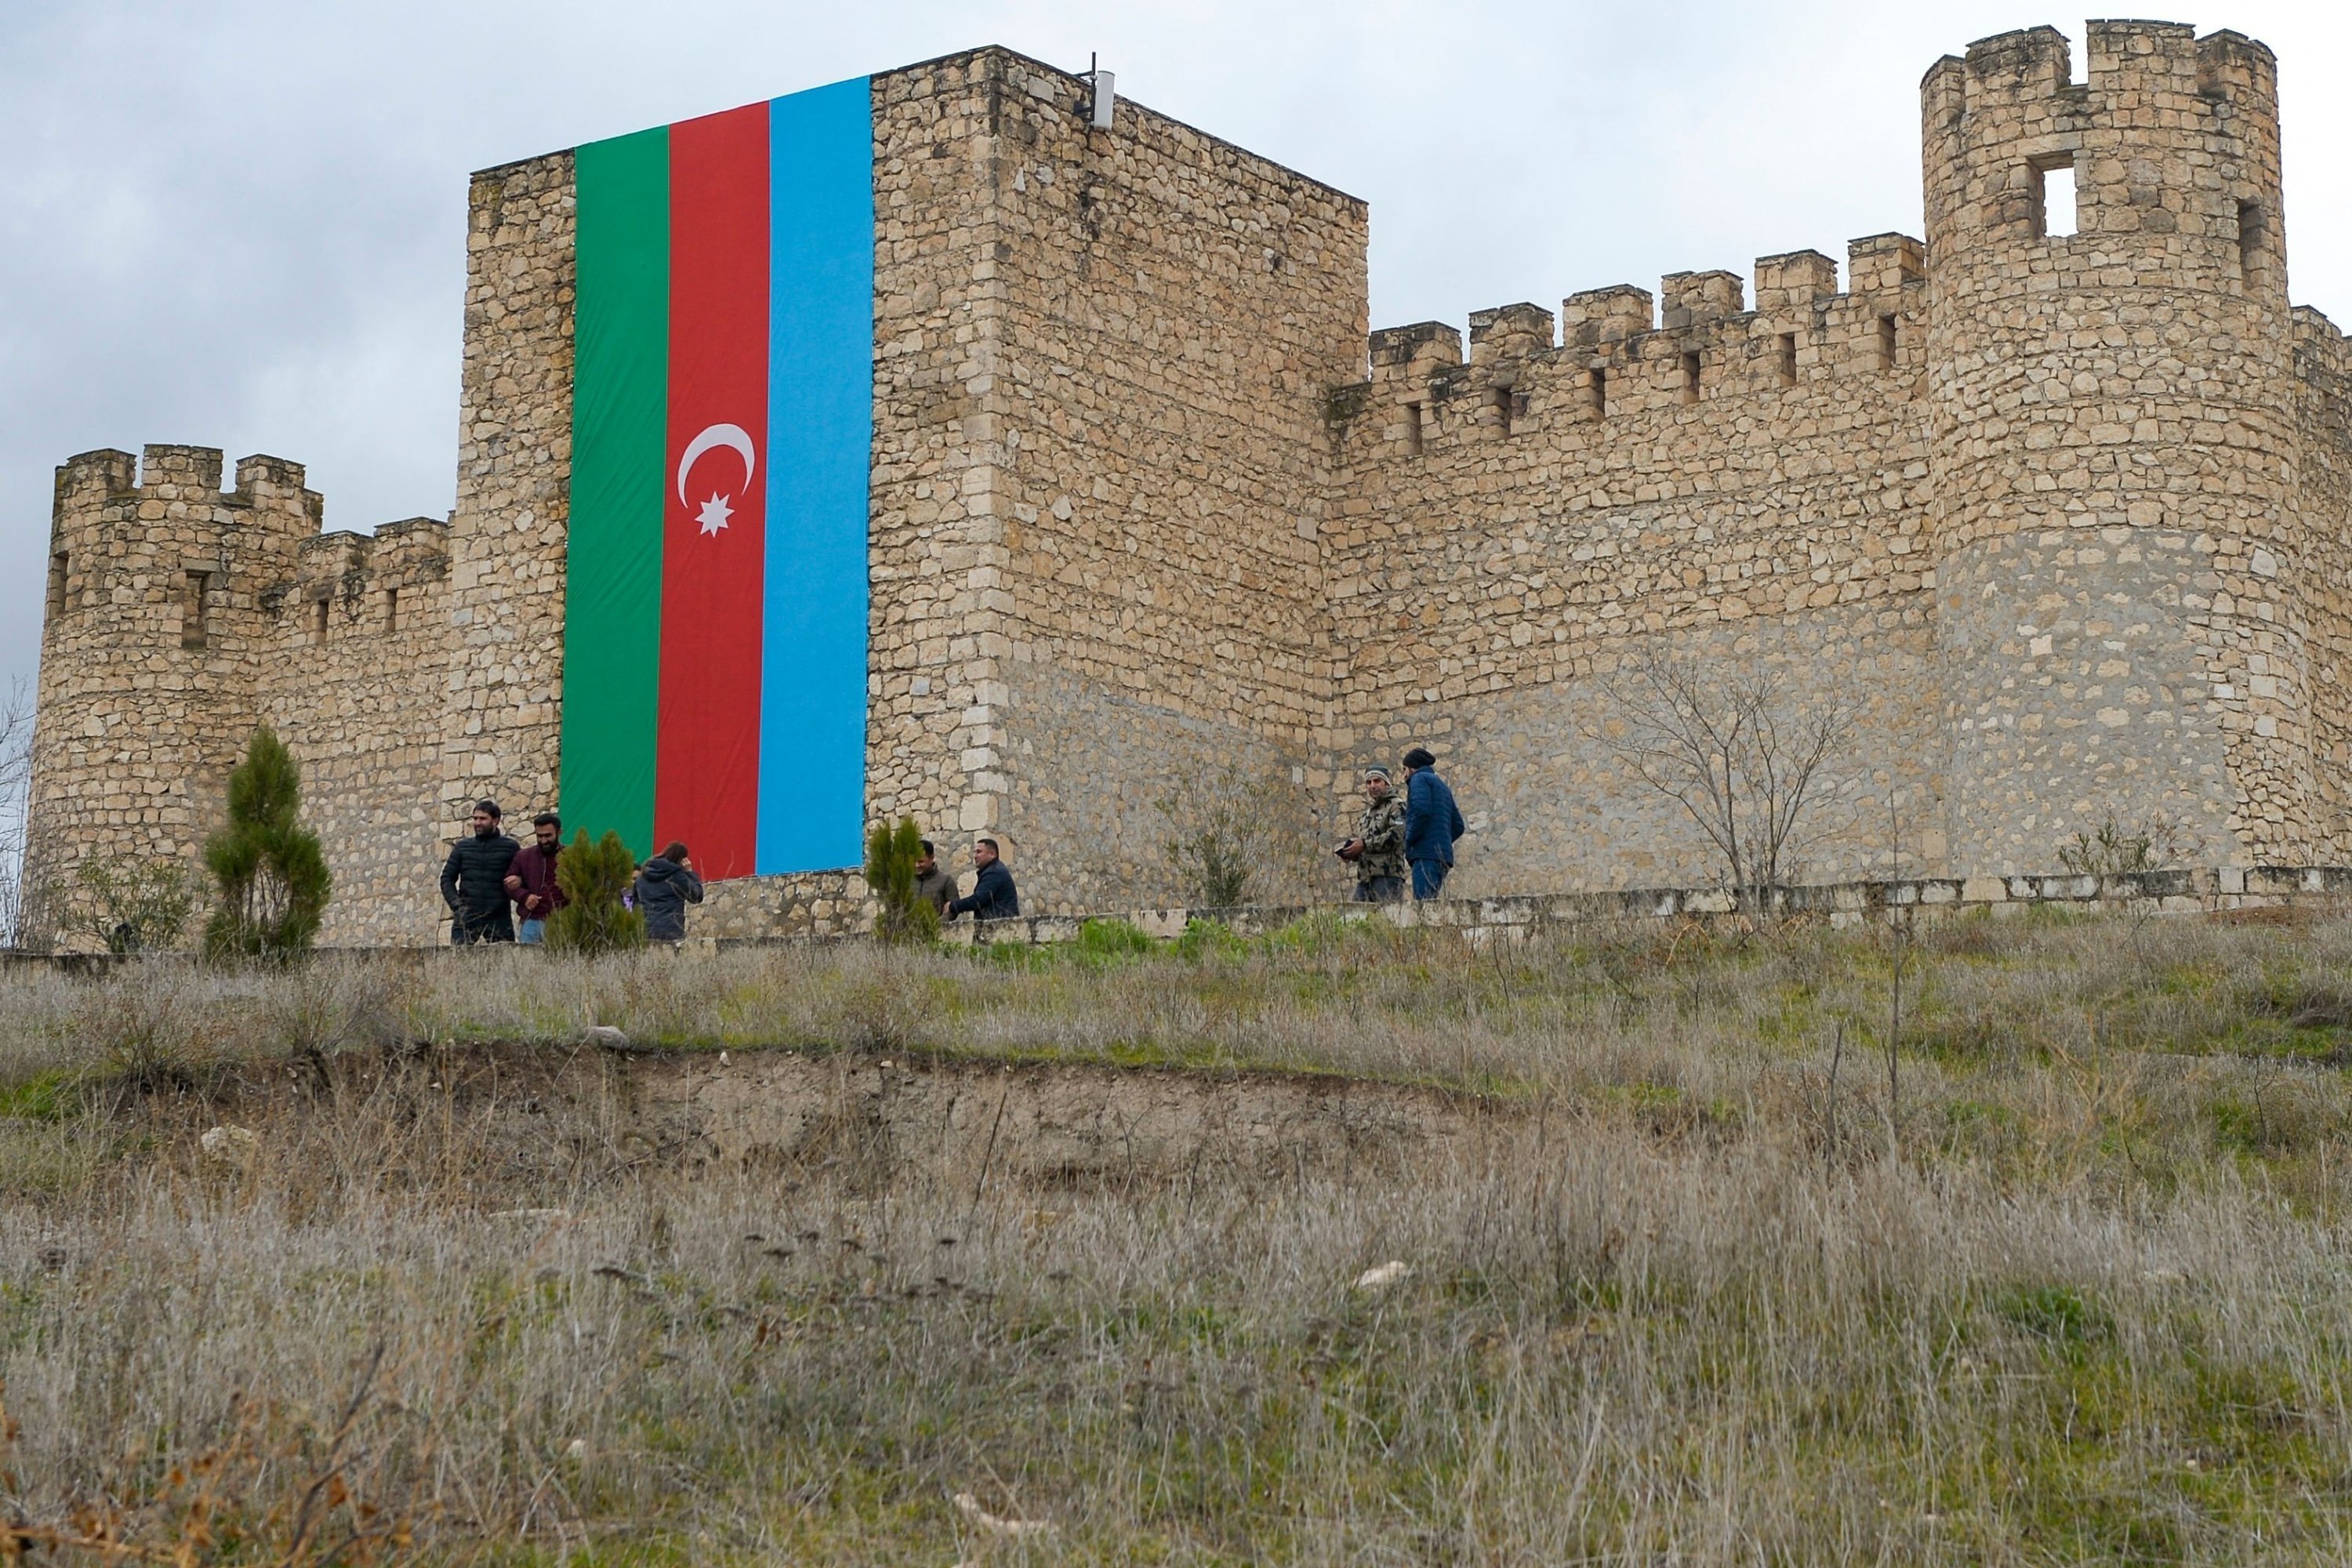 Castles and fortresses in Armenia and Nagorno-Karabakh